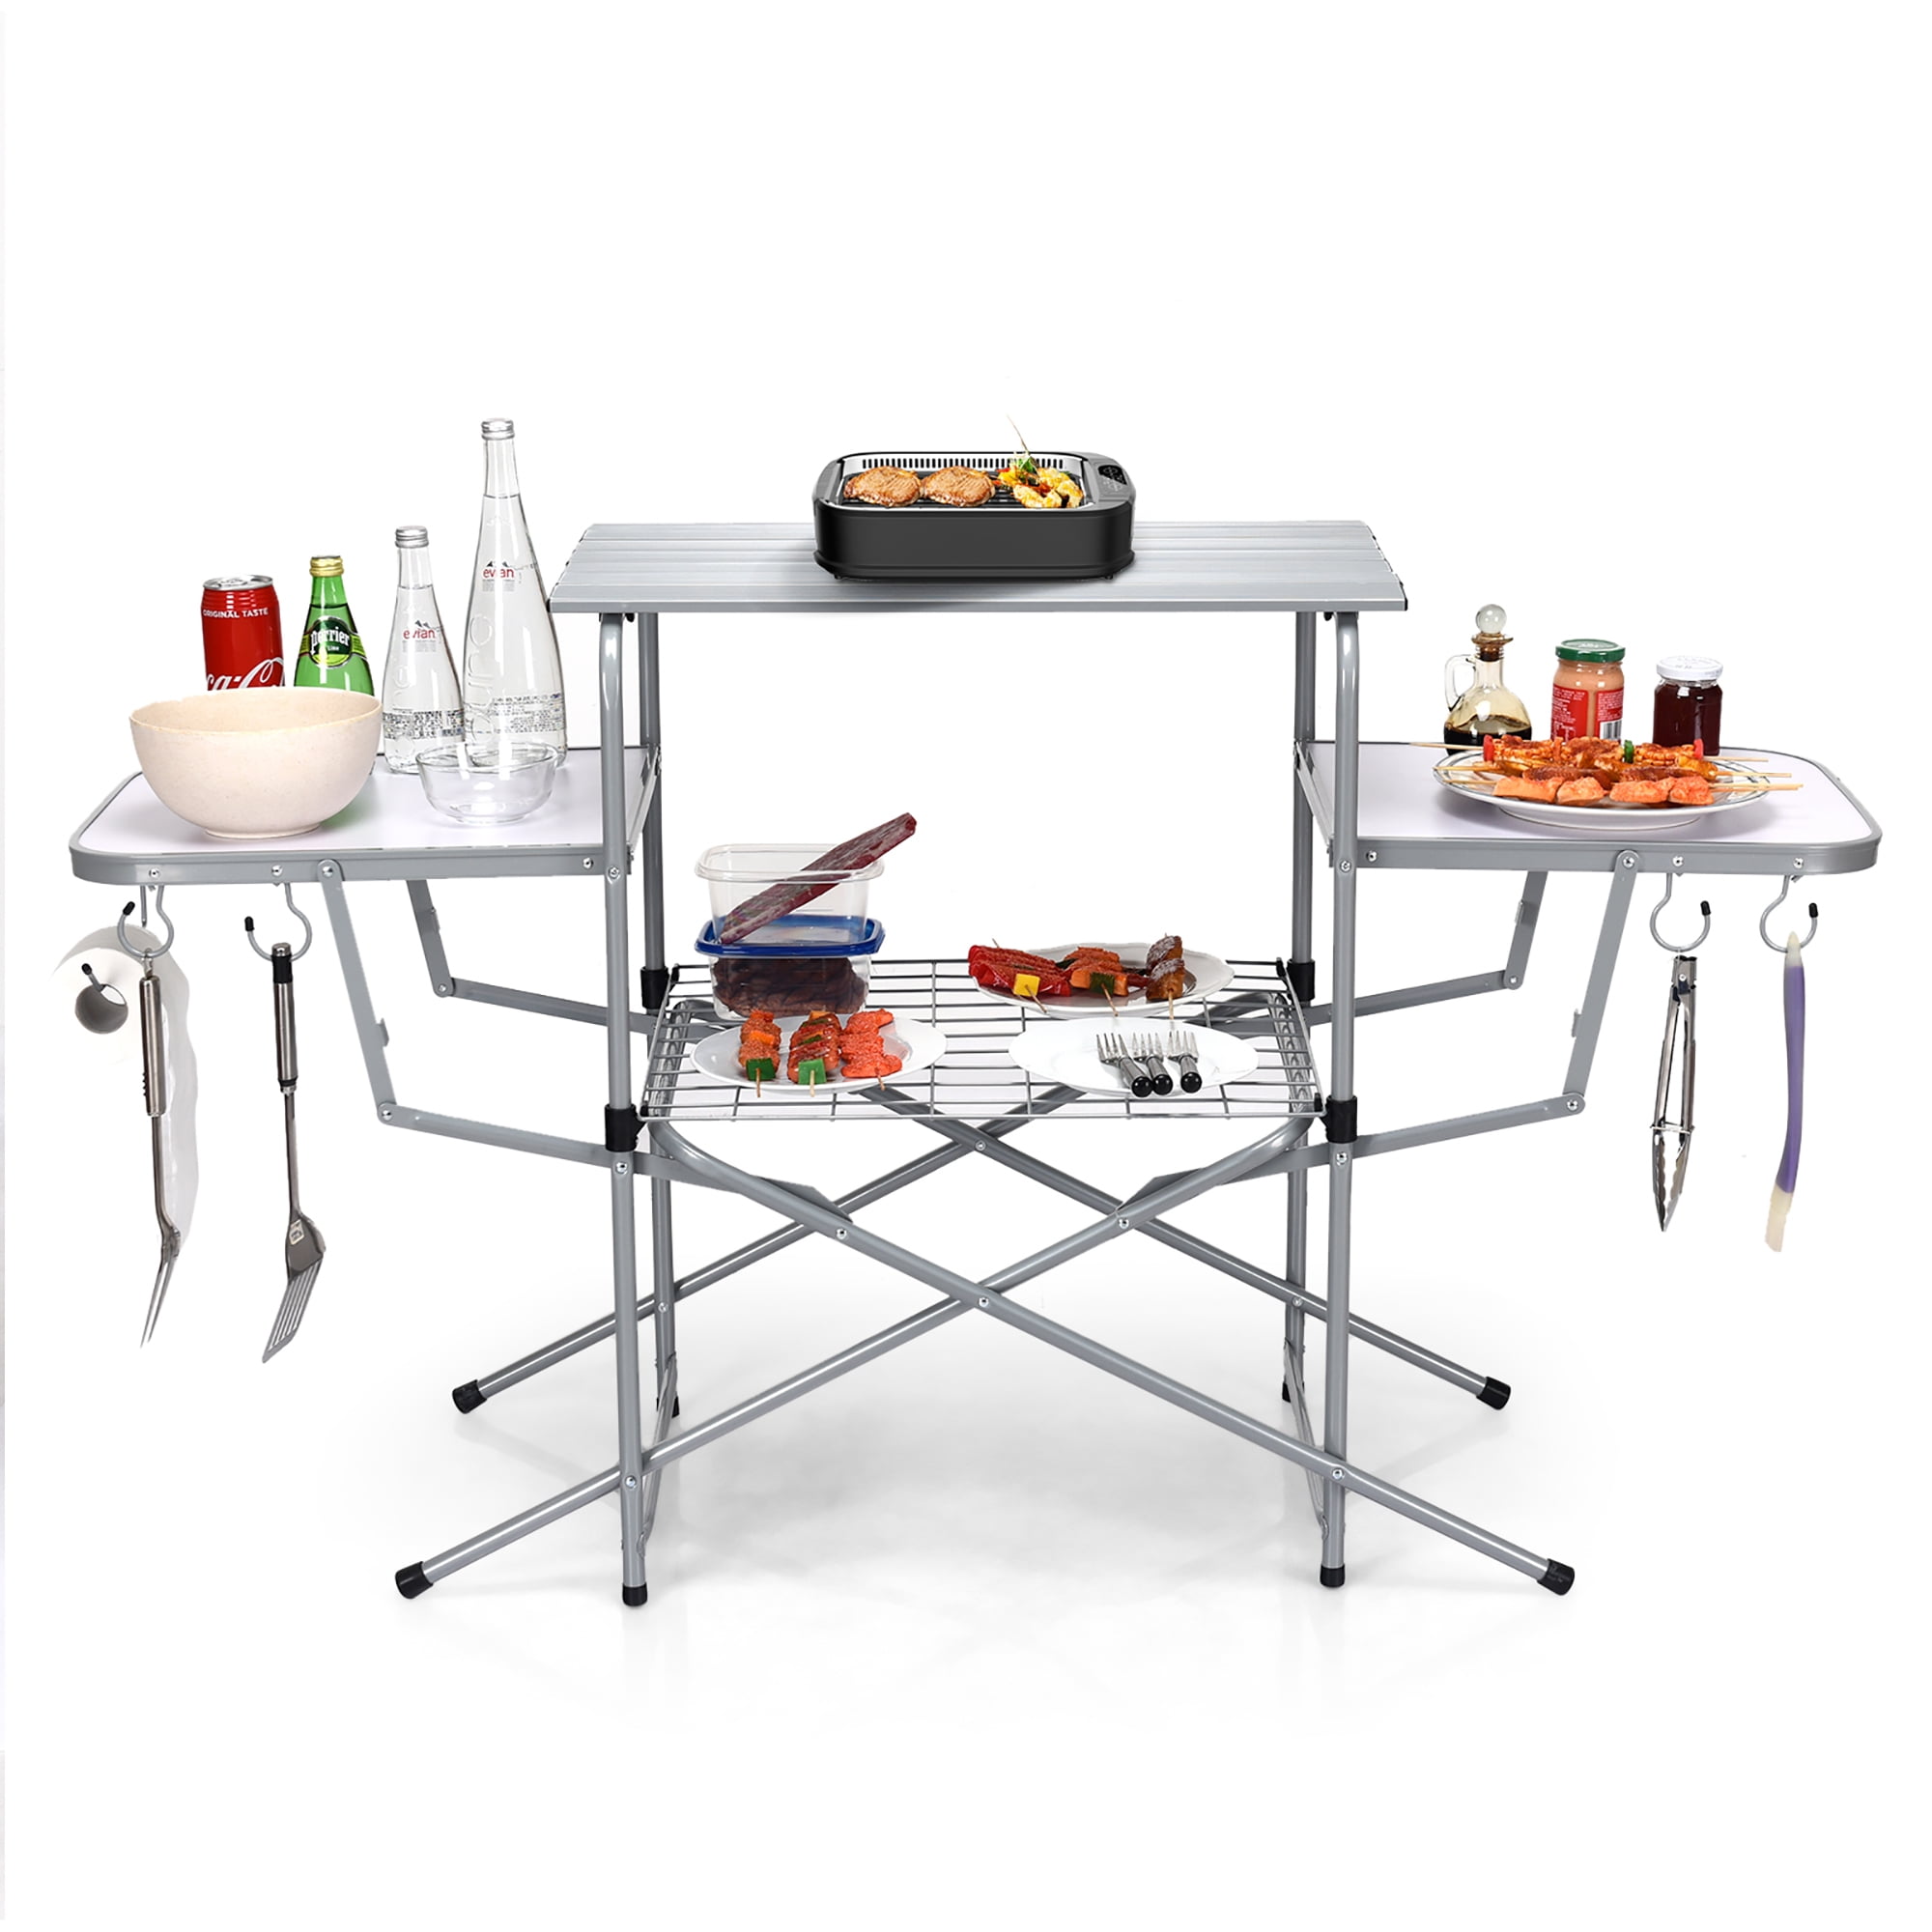 Pack-Away Outdoor Kitchen Deluxe Portable Camping Table w/ Shelf Removable Rink